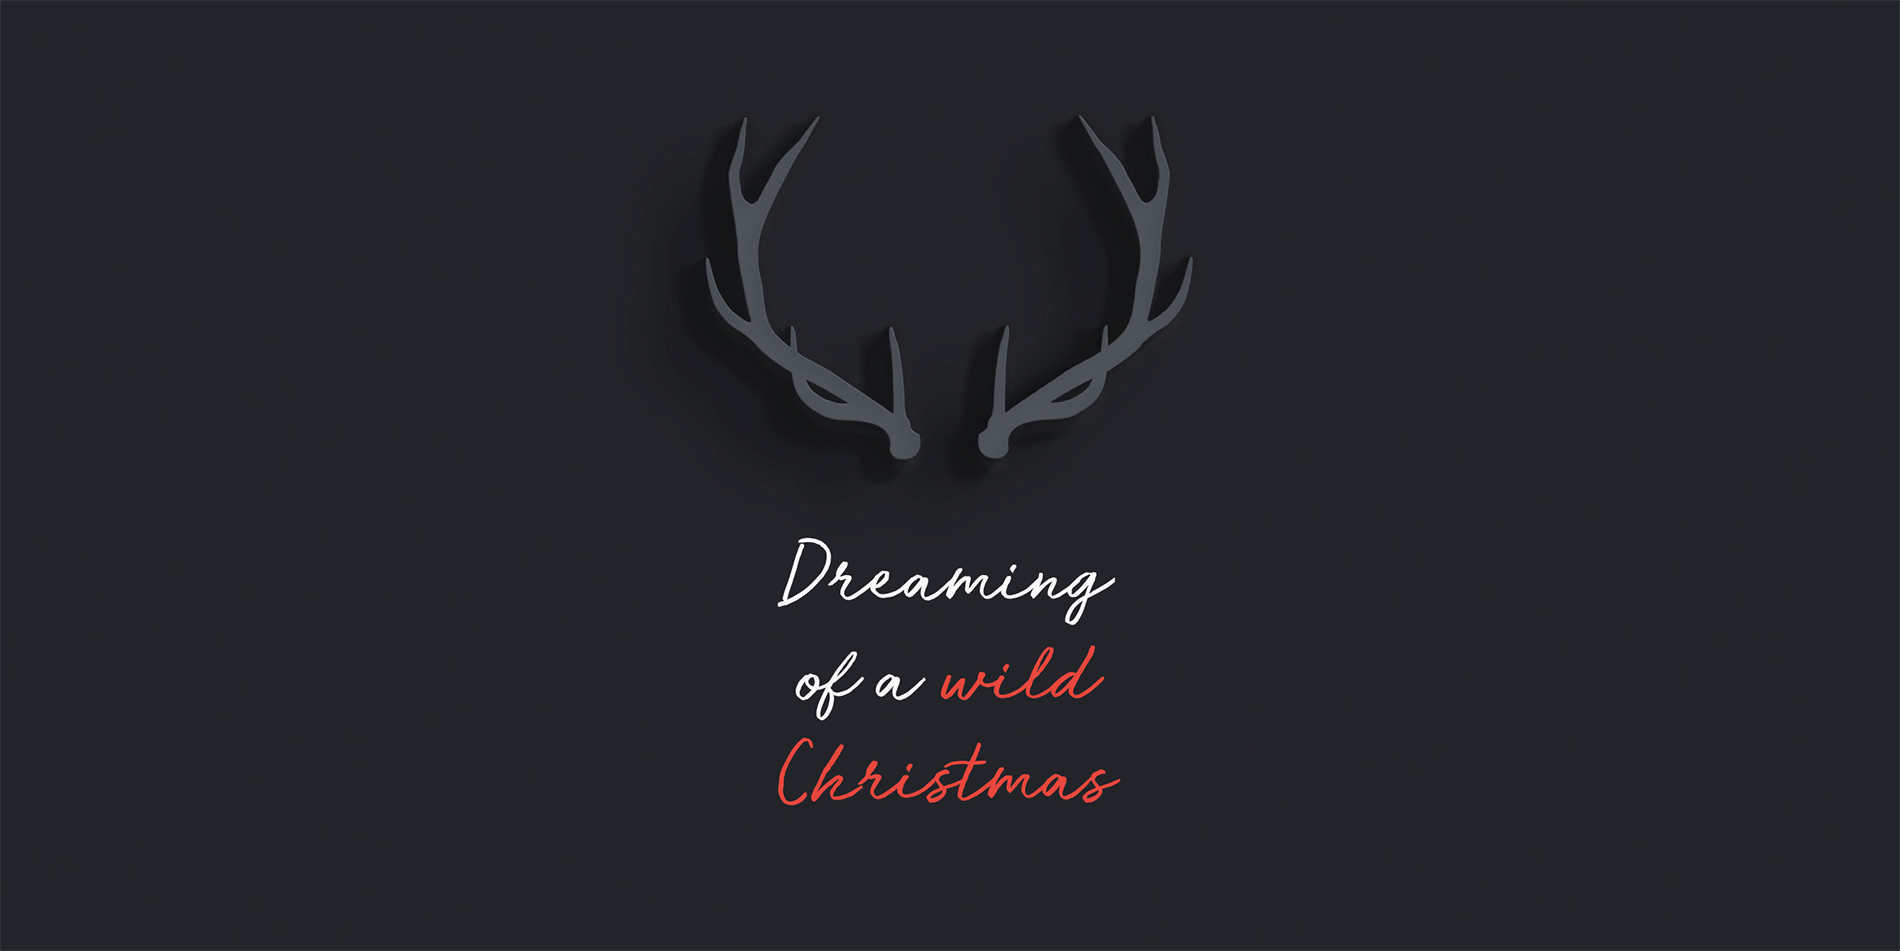 Dreaming of a wild Christmas